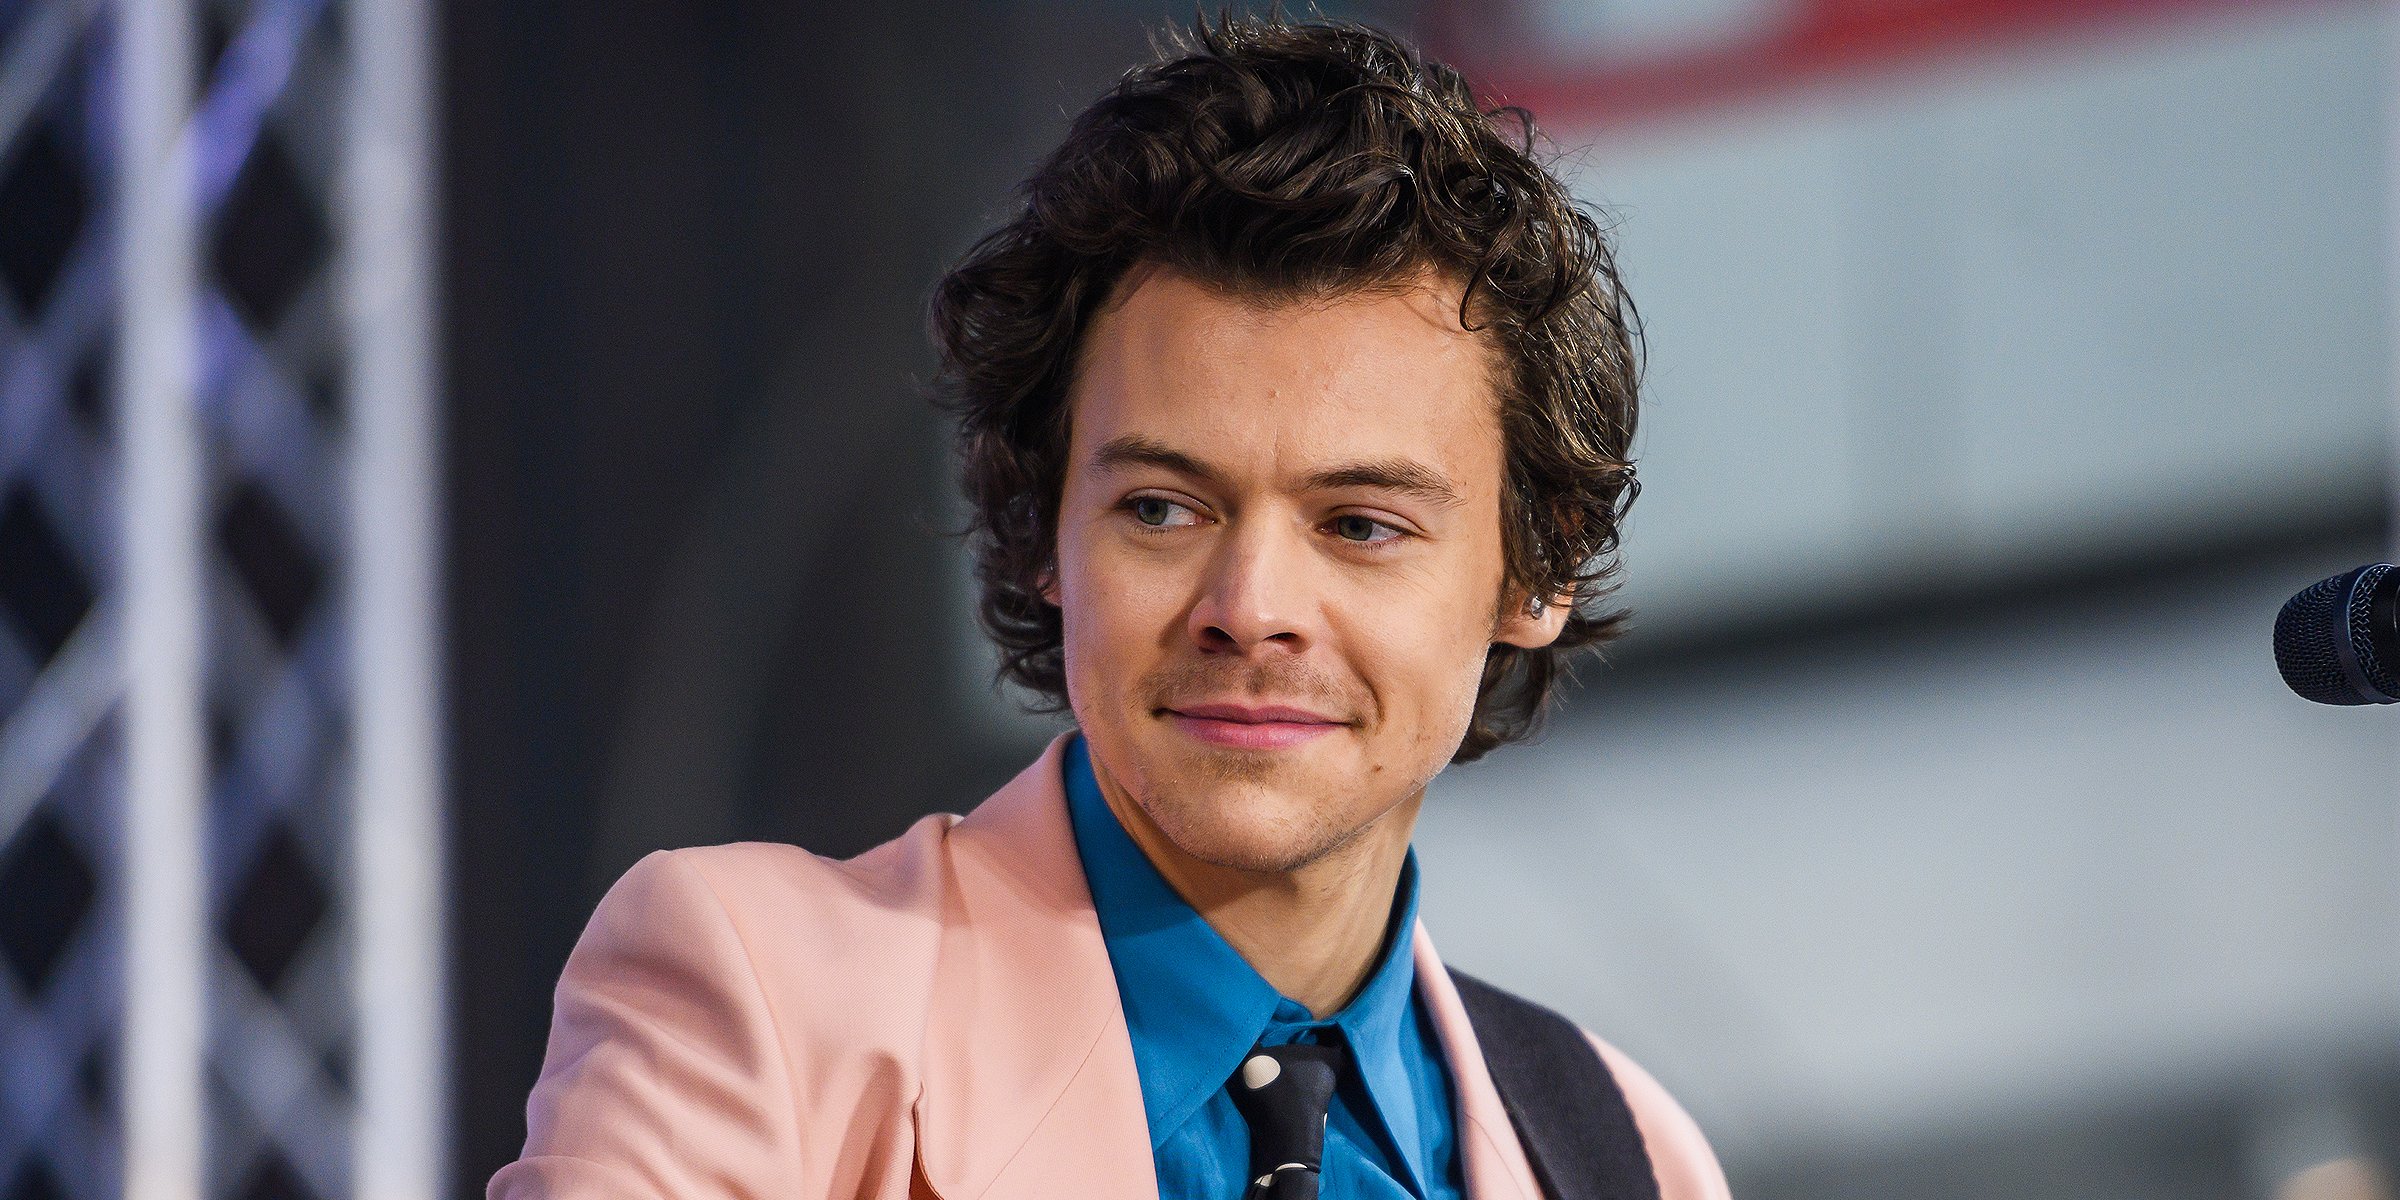 Harry Styles | Source: Getty Images